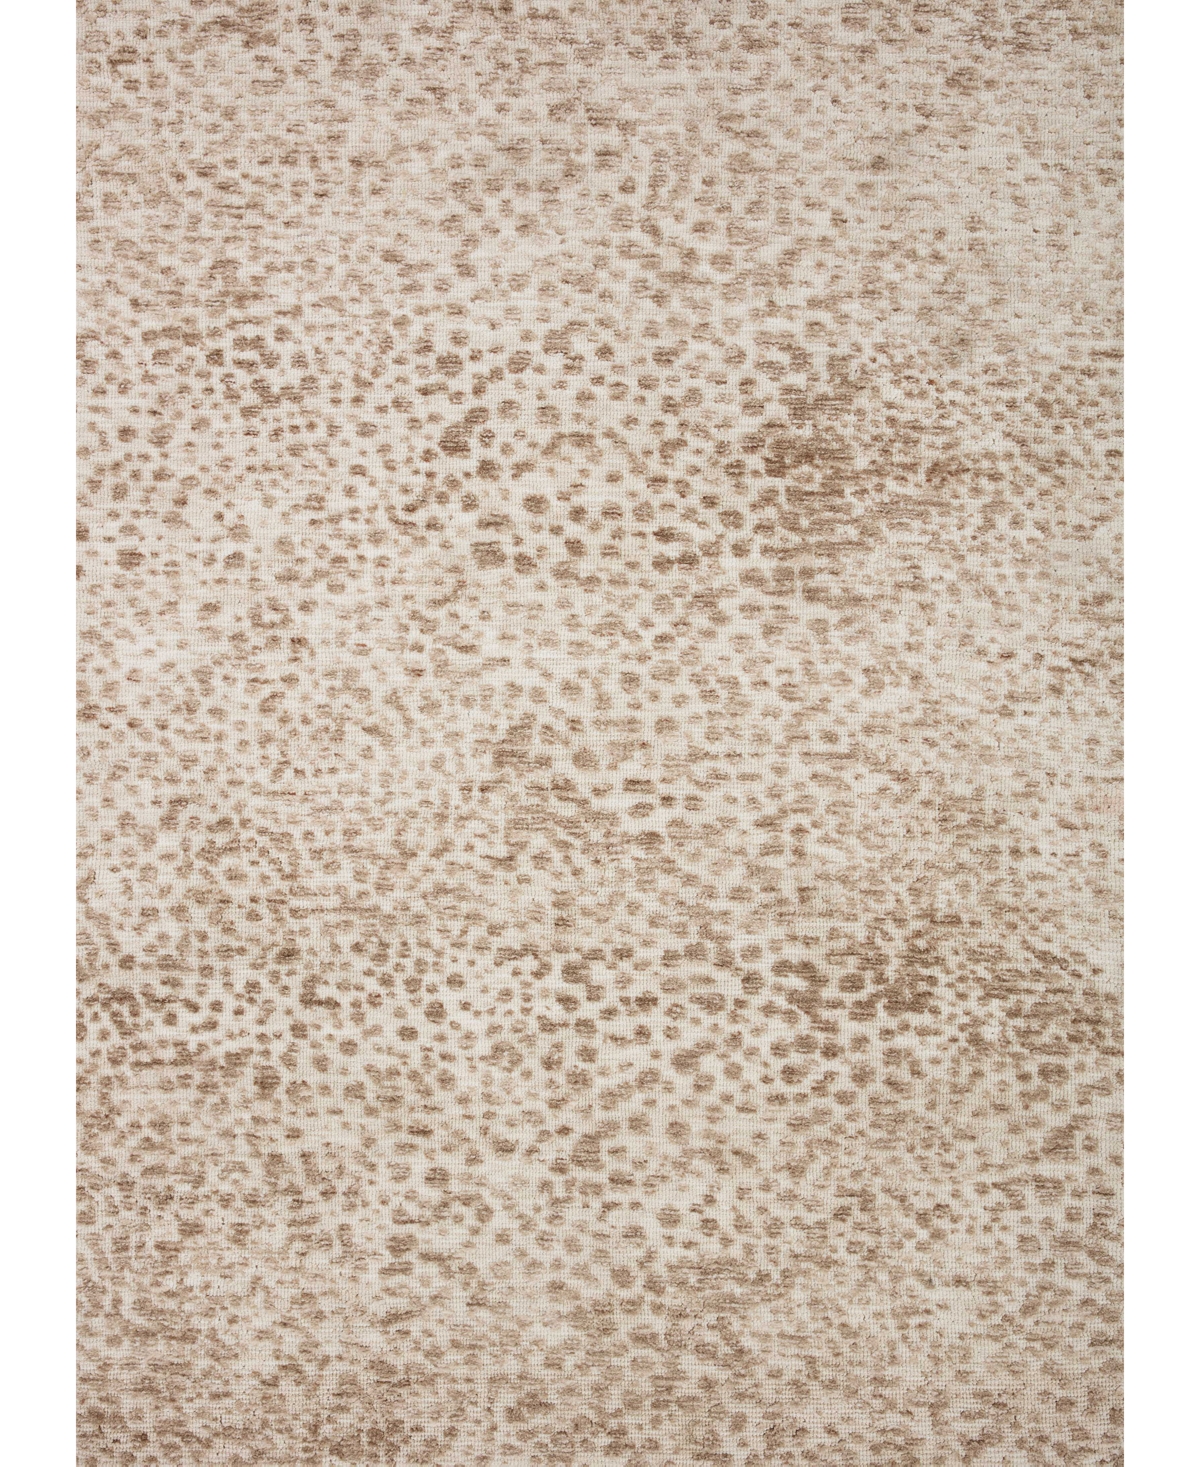 Loloi Neda Ned-02 8'6" X 12' Area Rug In Ivory,sand